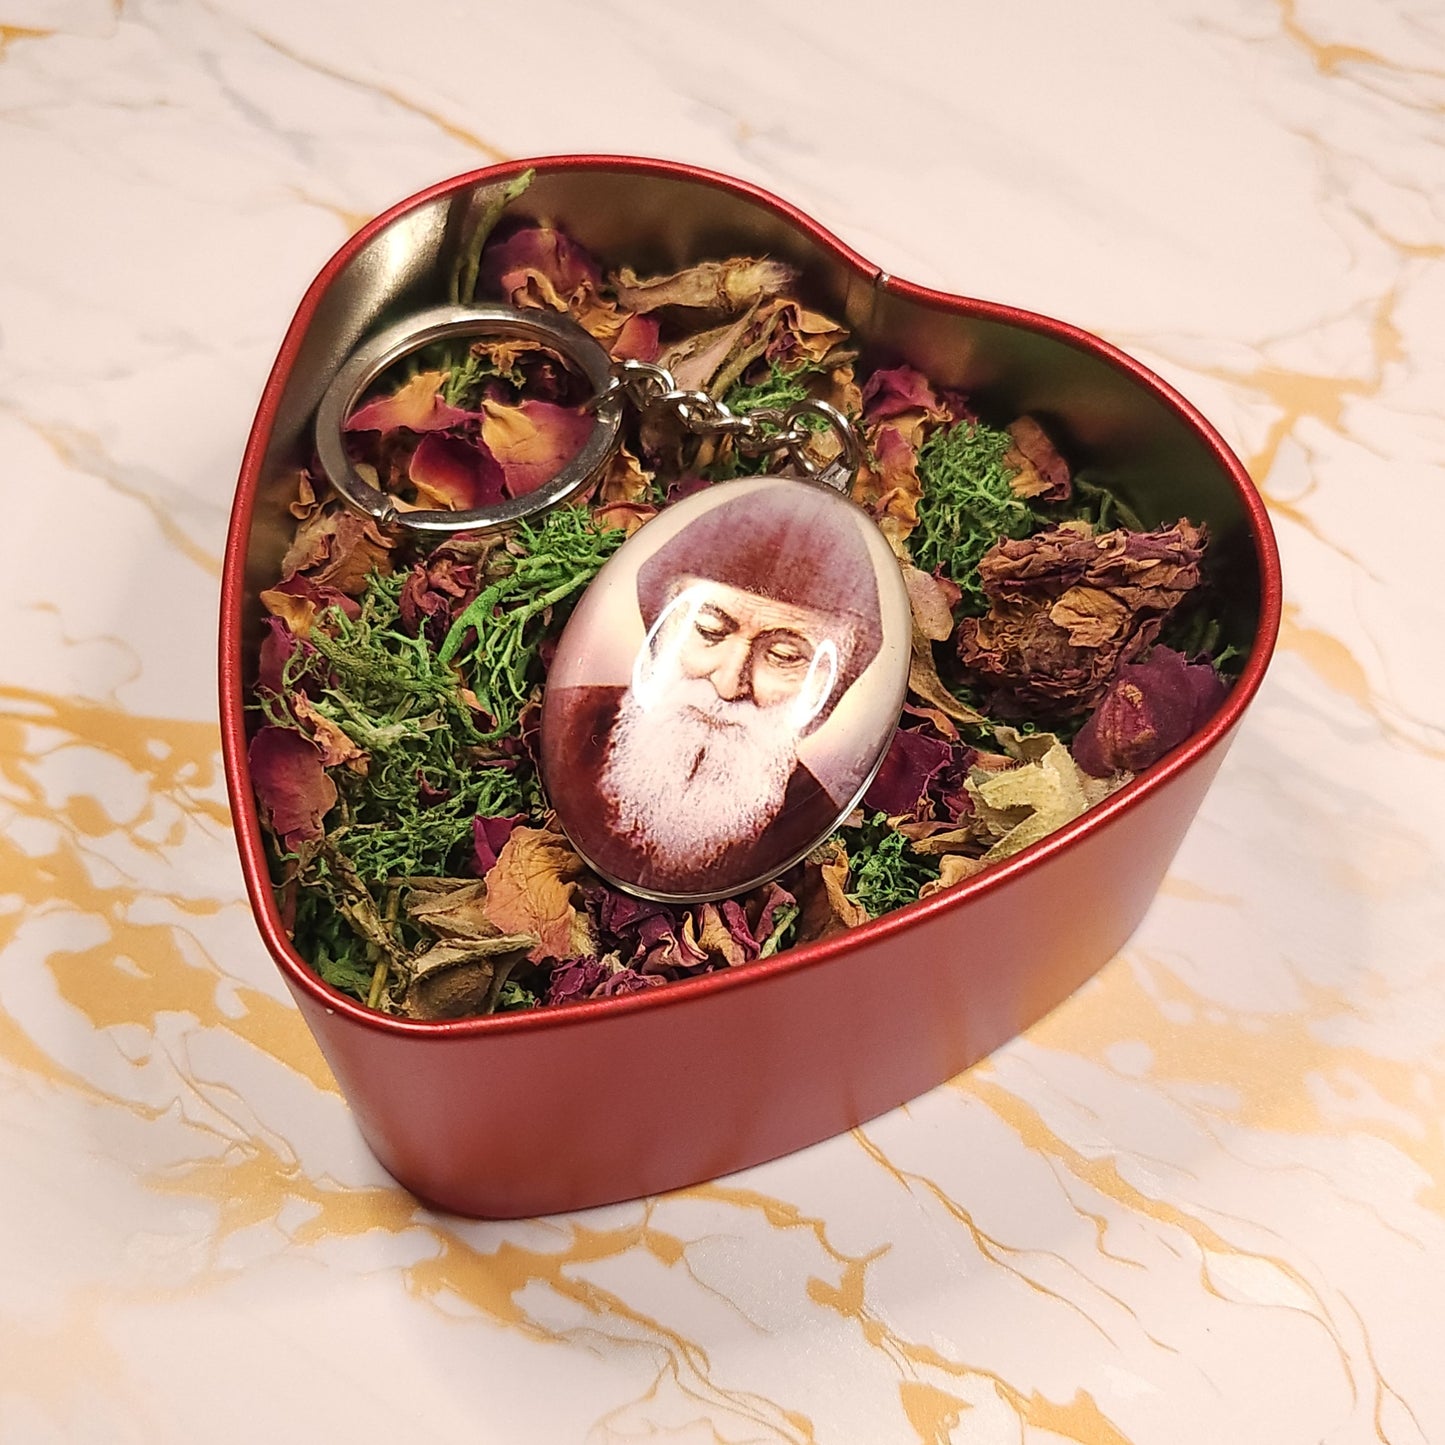 Saint Charbel - Valentine's Day Heart Box - Our Lady of Gifts